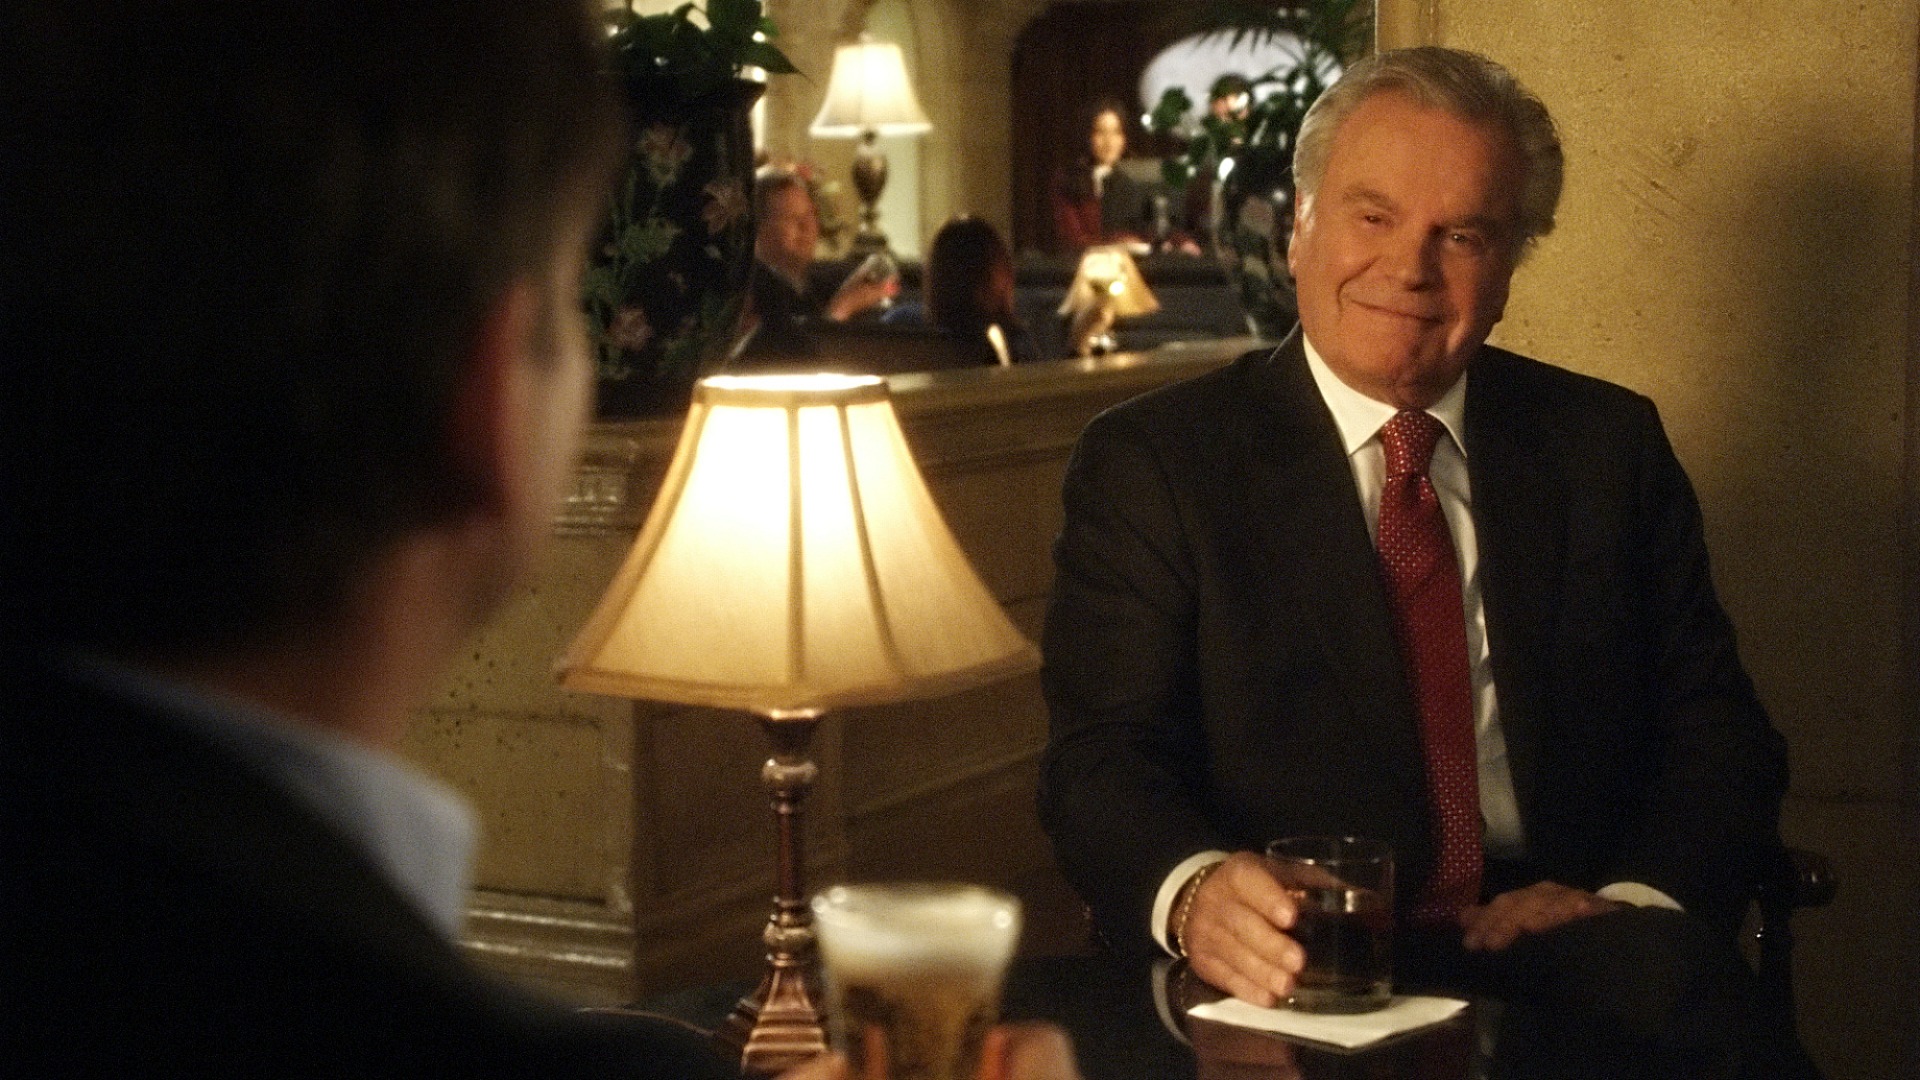 DiNozzo Sr. begins charming his way into our hearts